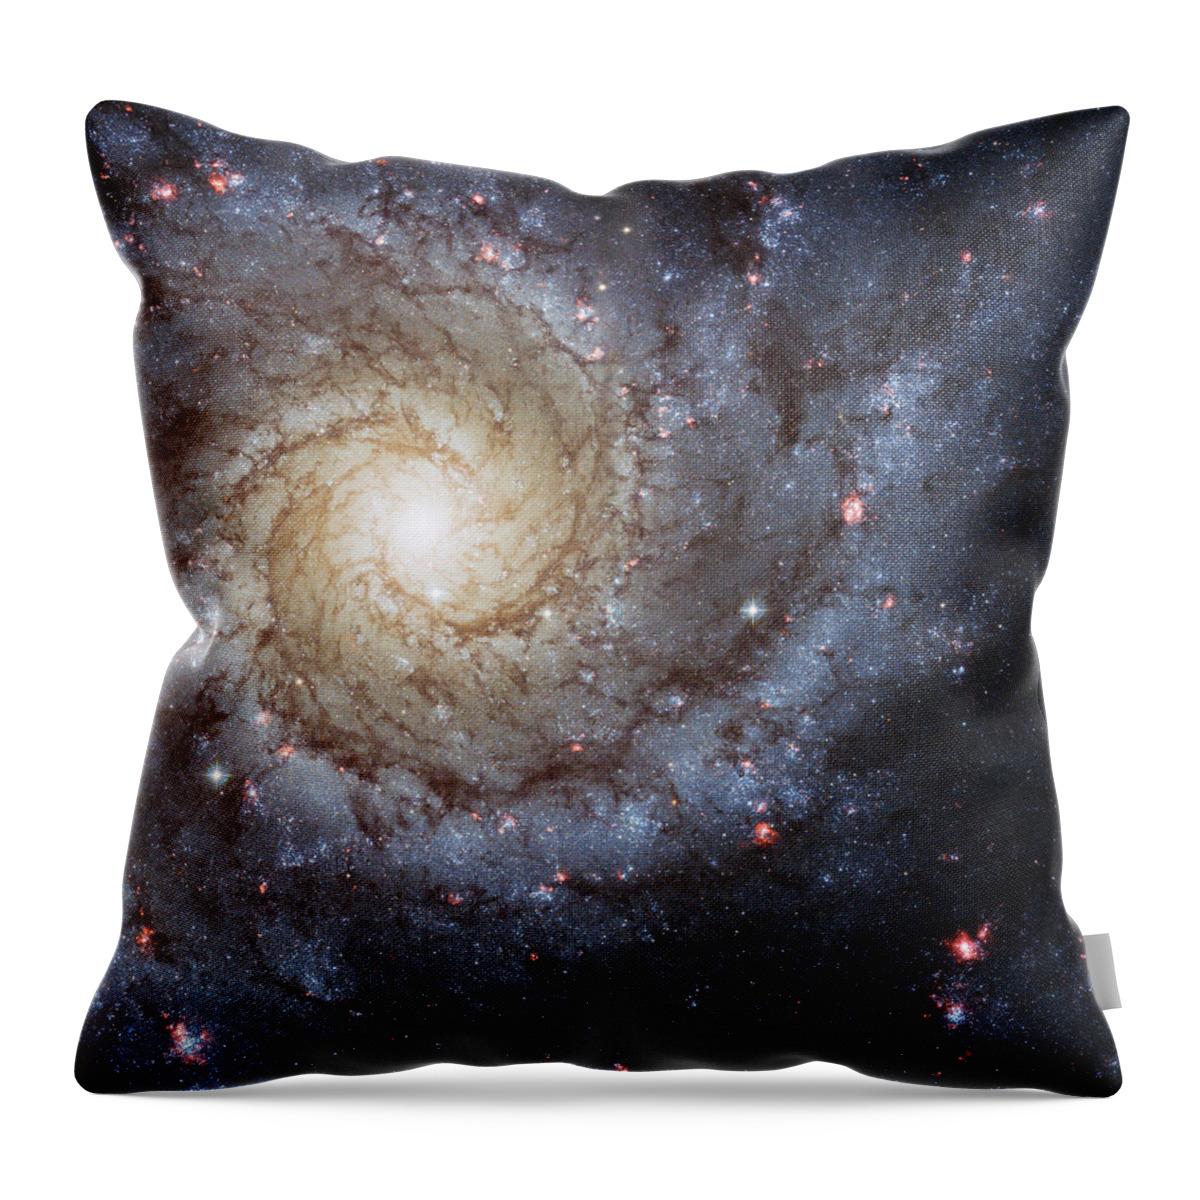 3scape Throw Pillow featuring the photograph Spiral Galaxy M74 by Adam Romanowicz